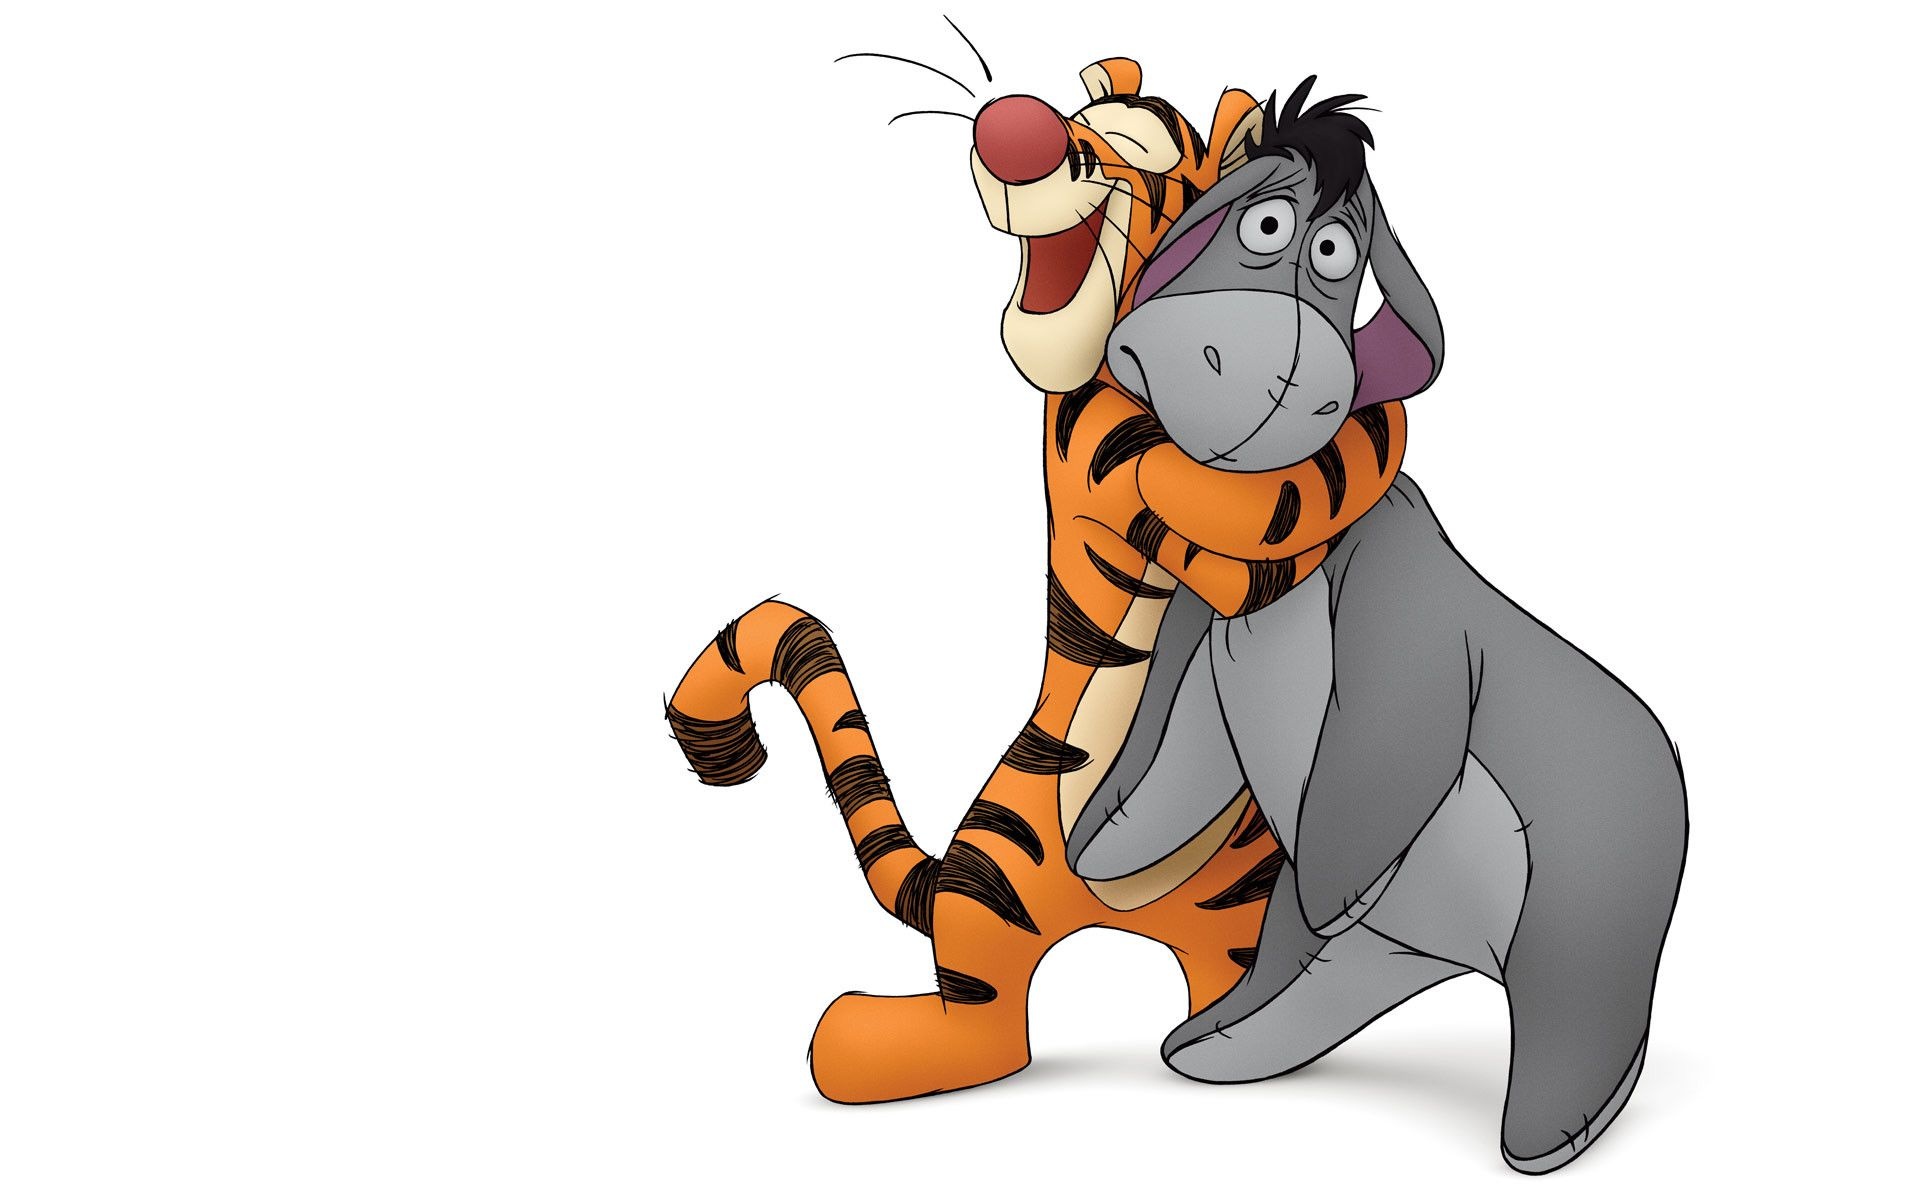 Tigger, Winnie-the-Pooh animation, Tigger Winnie the Pooh wallpapers, Tigger backgrounds, 1920x1200 HD Desktop